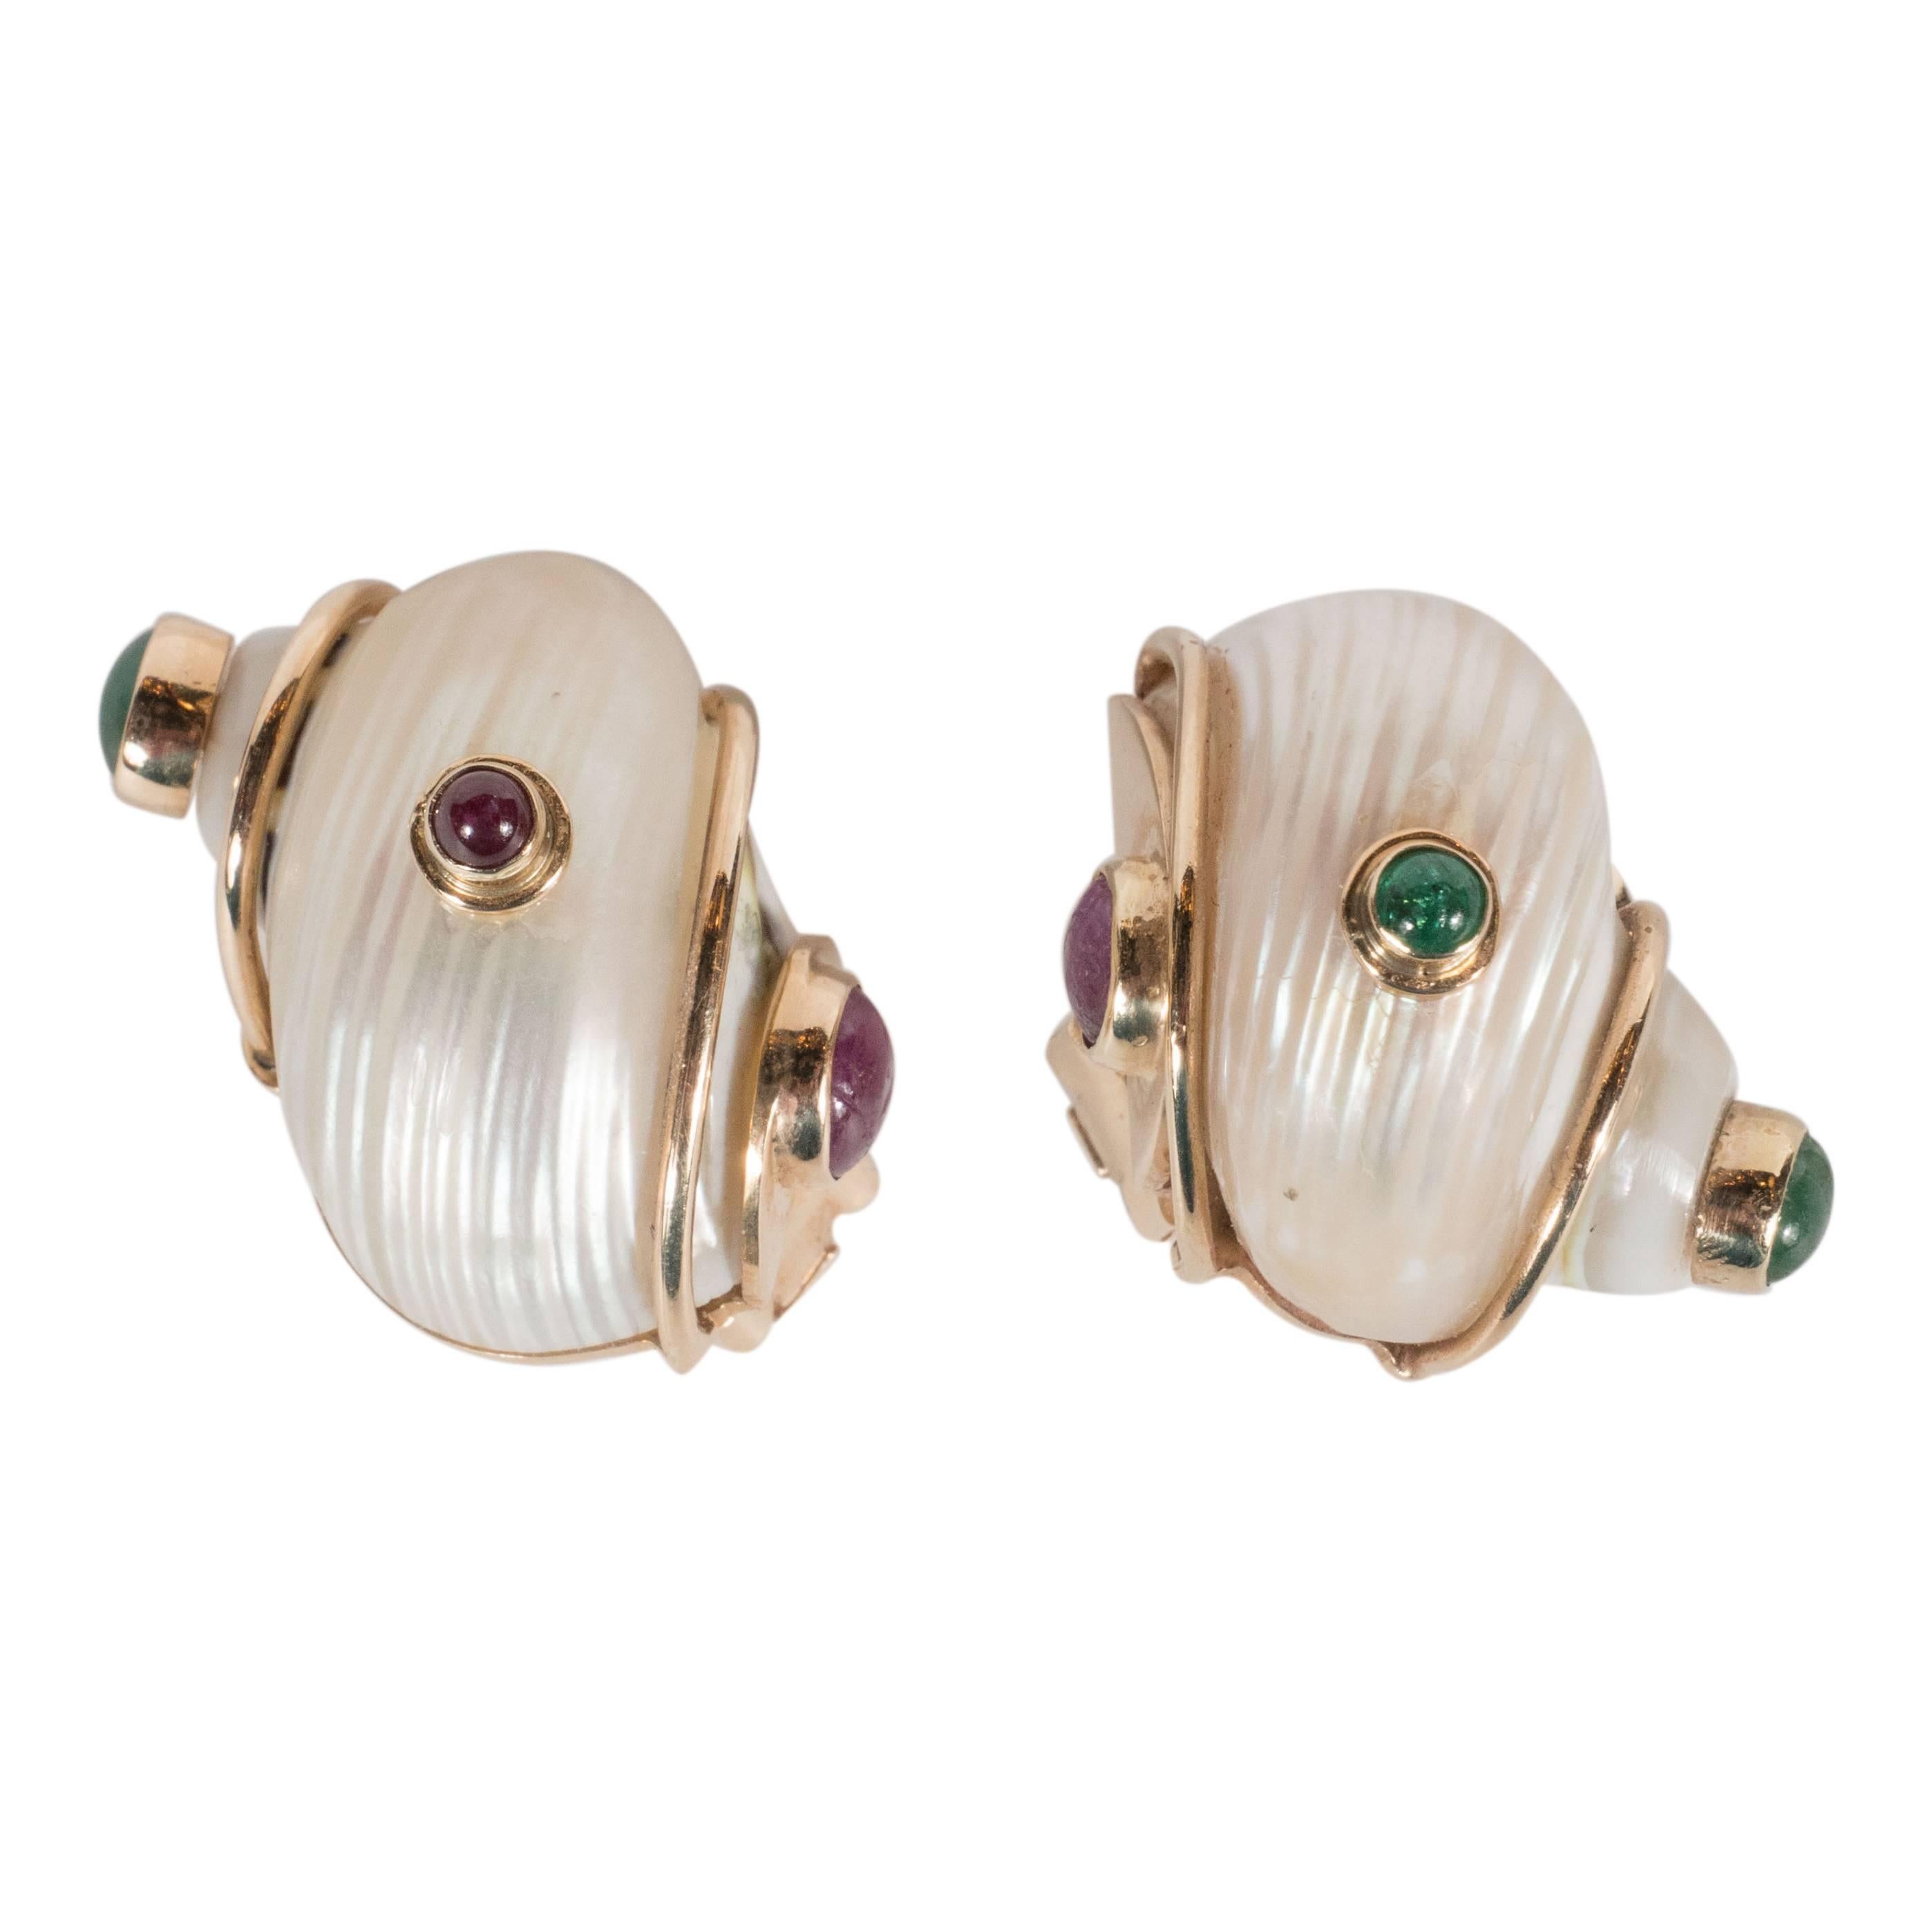 Mid-Century Seamann Schepps Shell Earrings with Cabachon Emeralds and Rubies